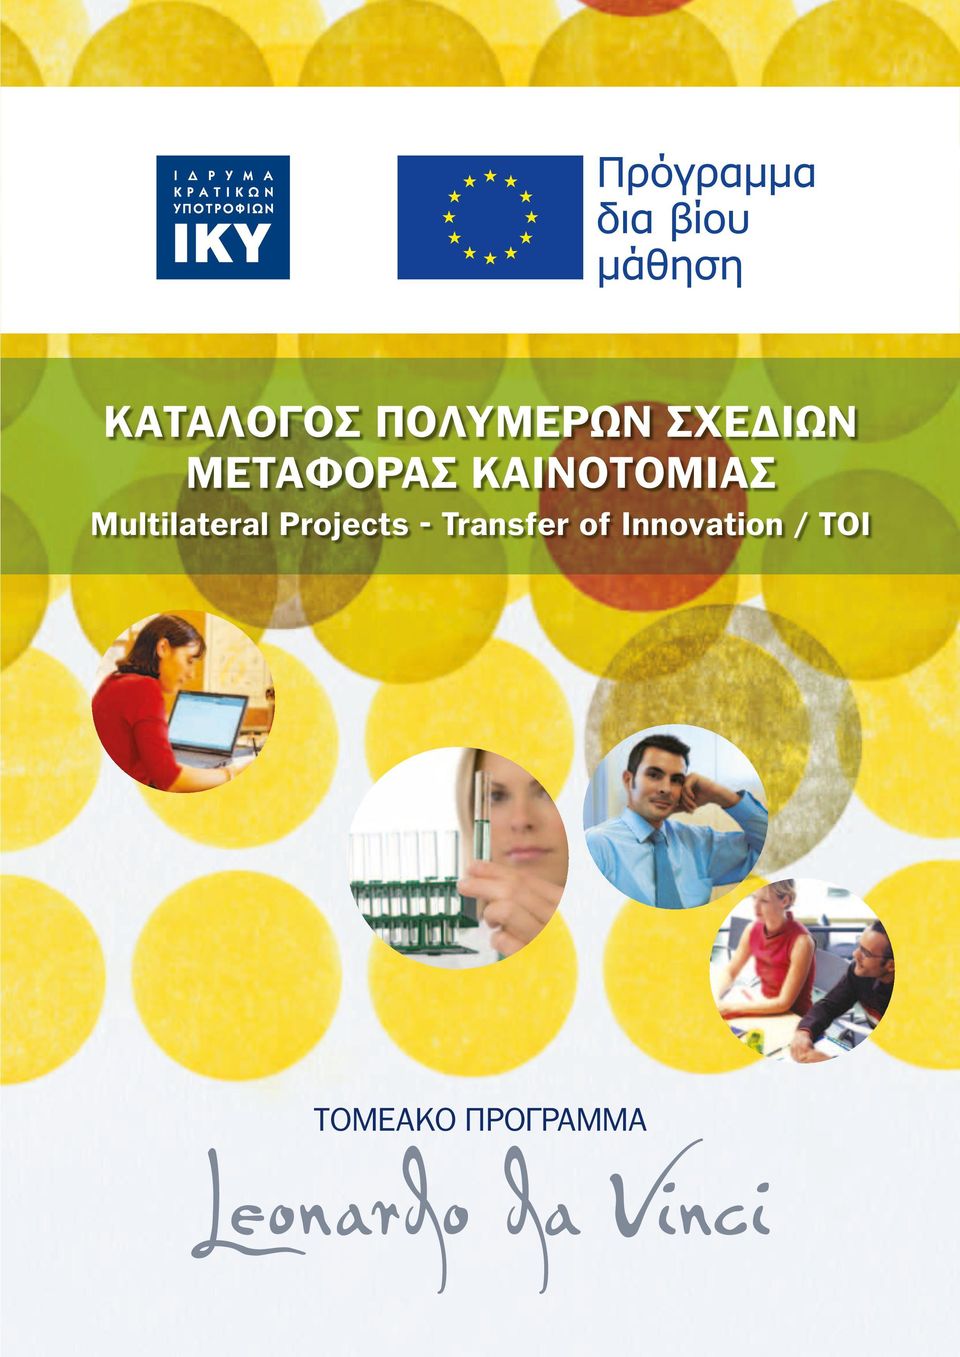 Projects - Transfer of Innovation